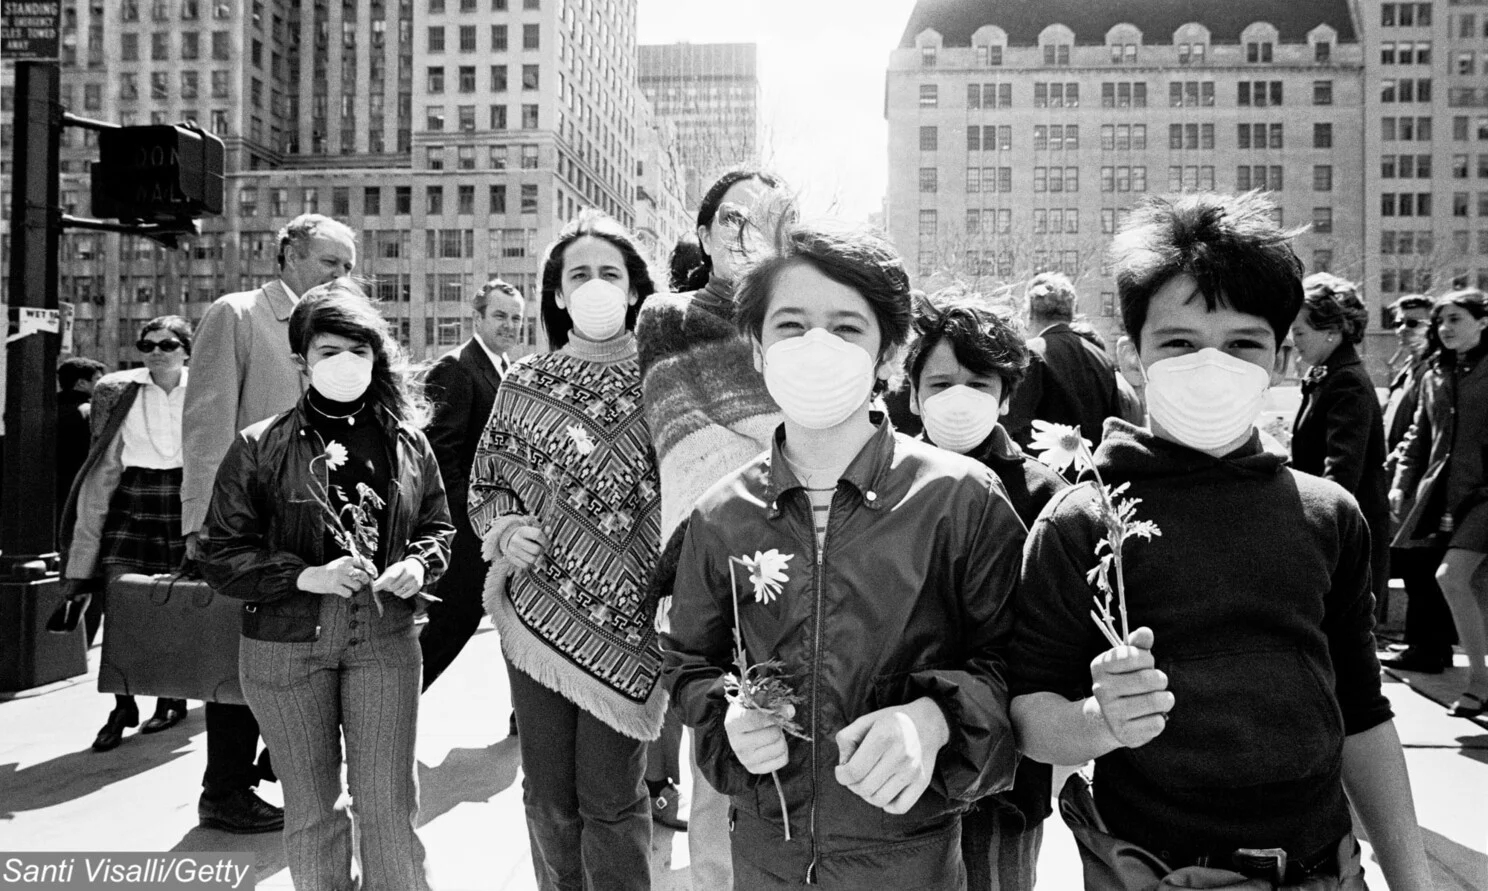 1970, Earth day activists wearing masks to highlight pollution